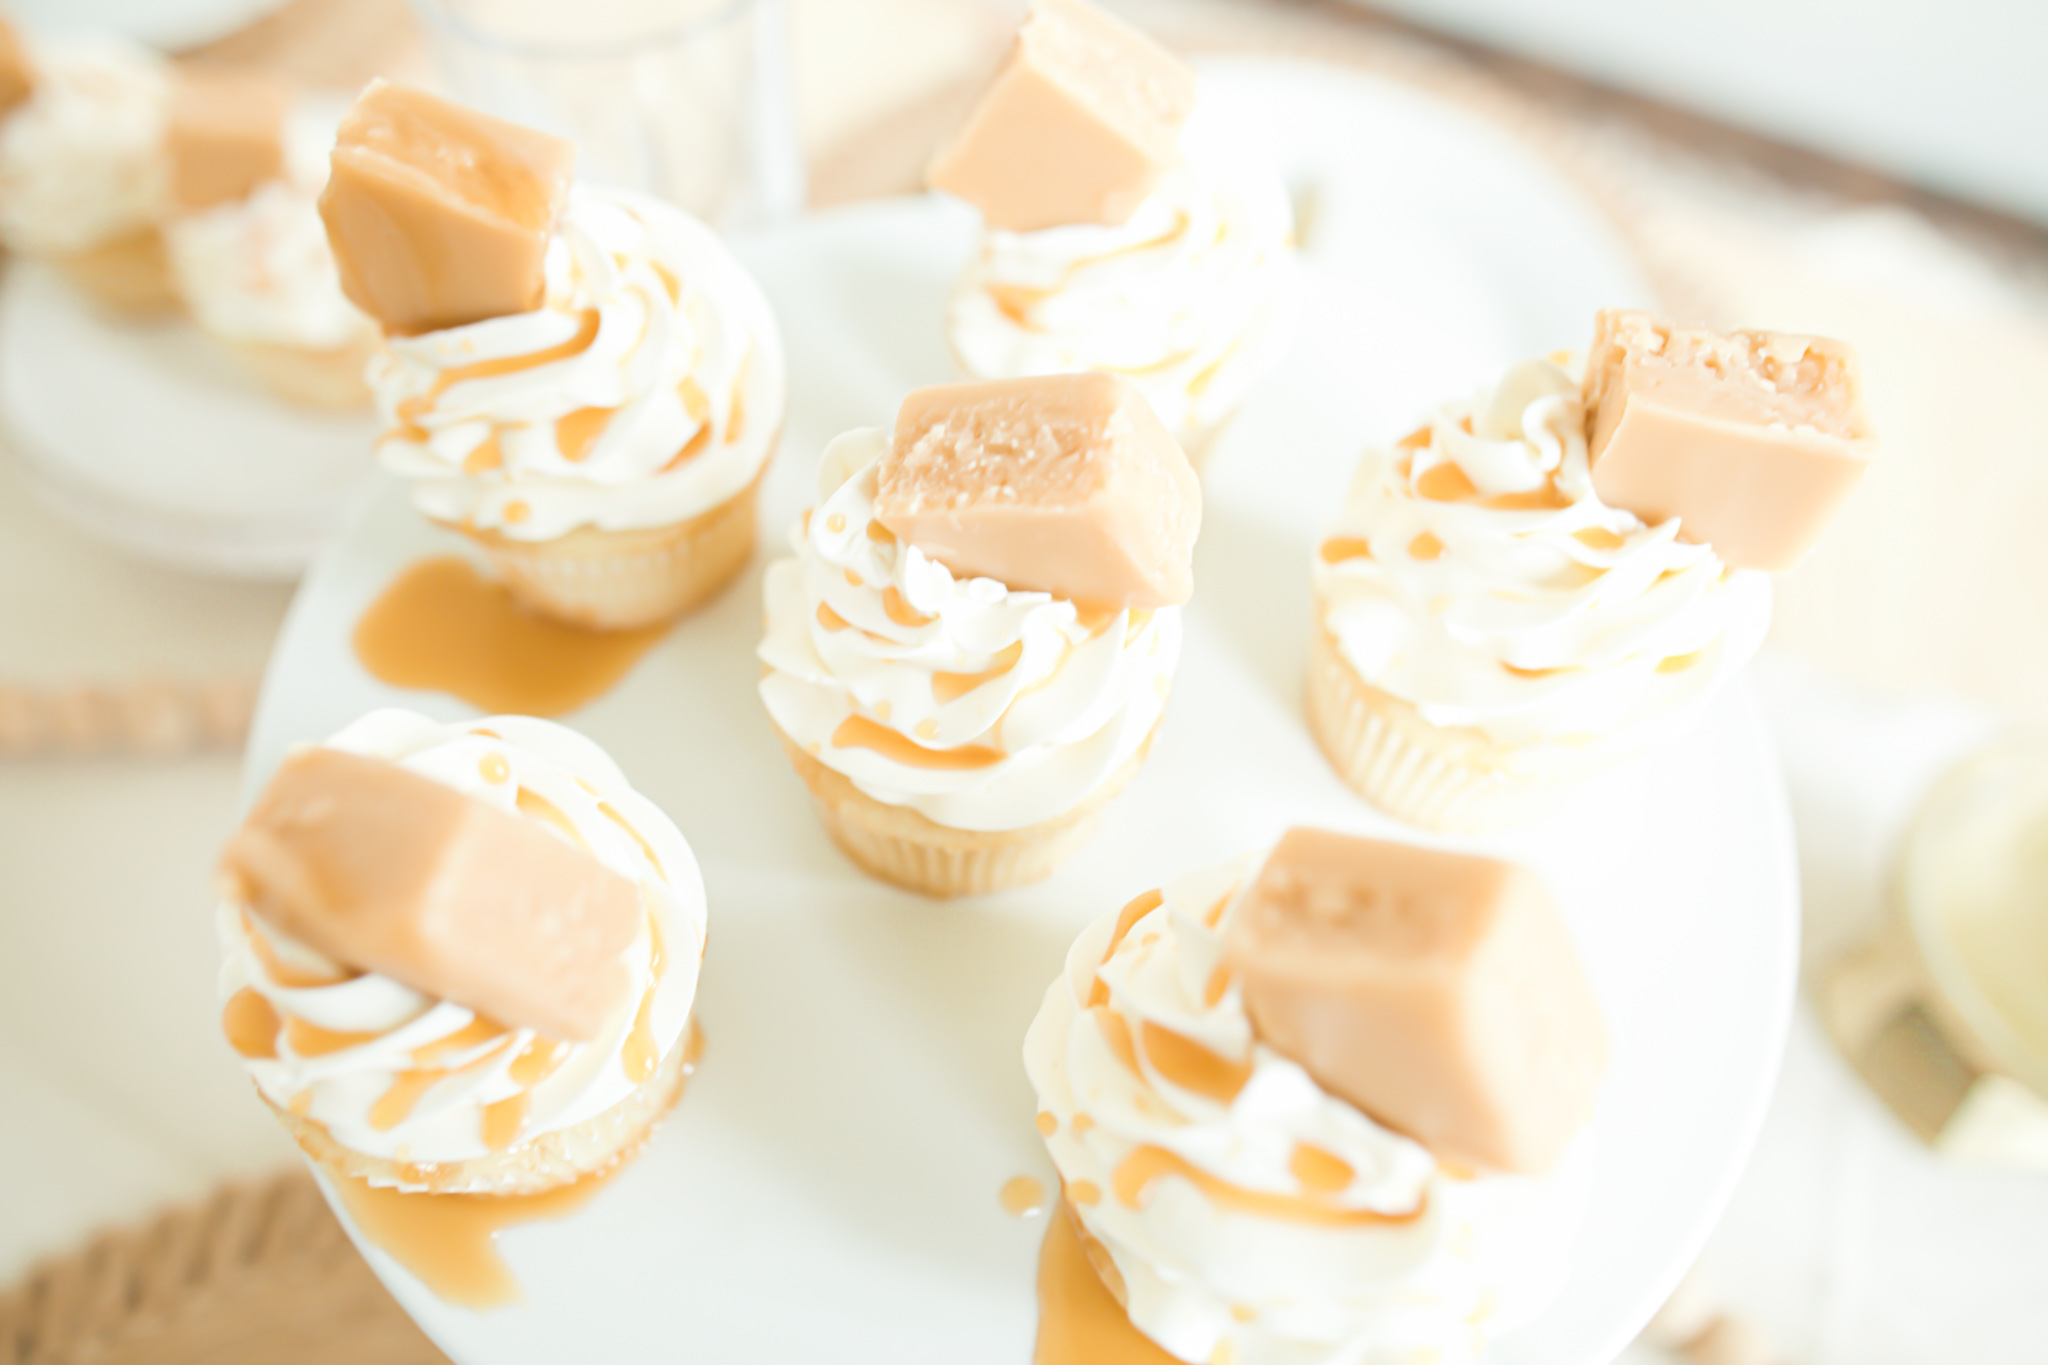 cupcakes on platter with vanilla fudge and caramel drizzle